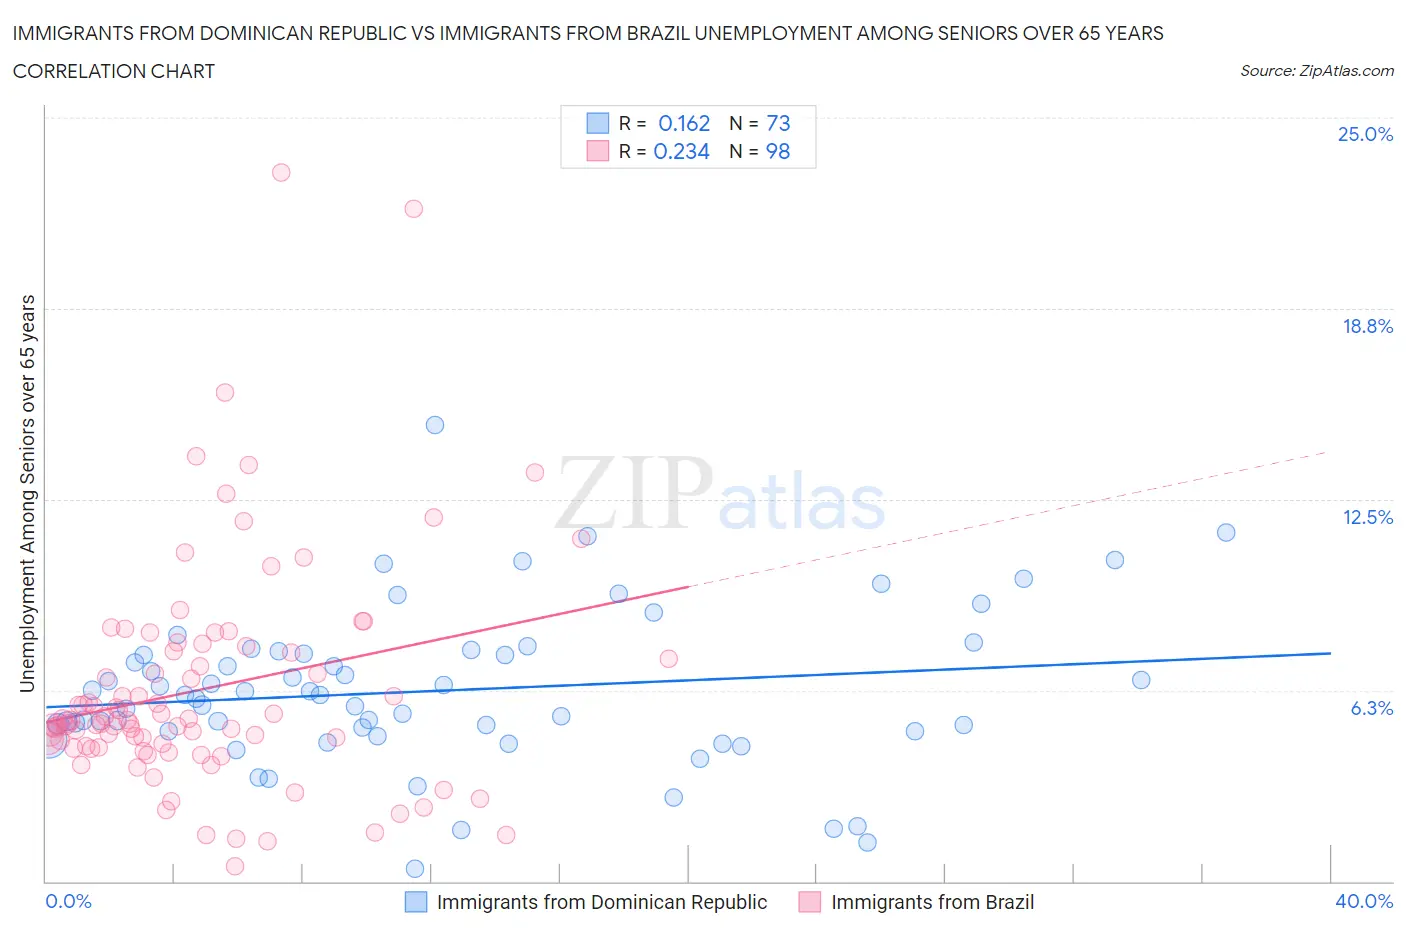 Immigrants from Dominican Republic vs Immigrants from Brazil Unemployment Among Seniors over 65 years